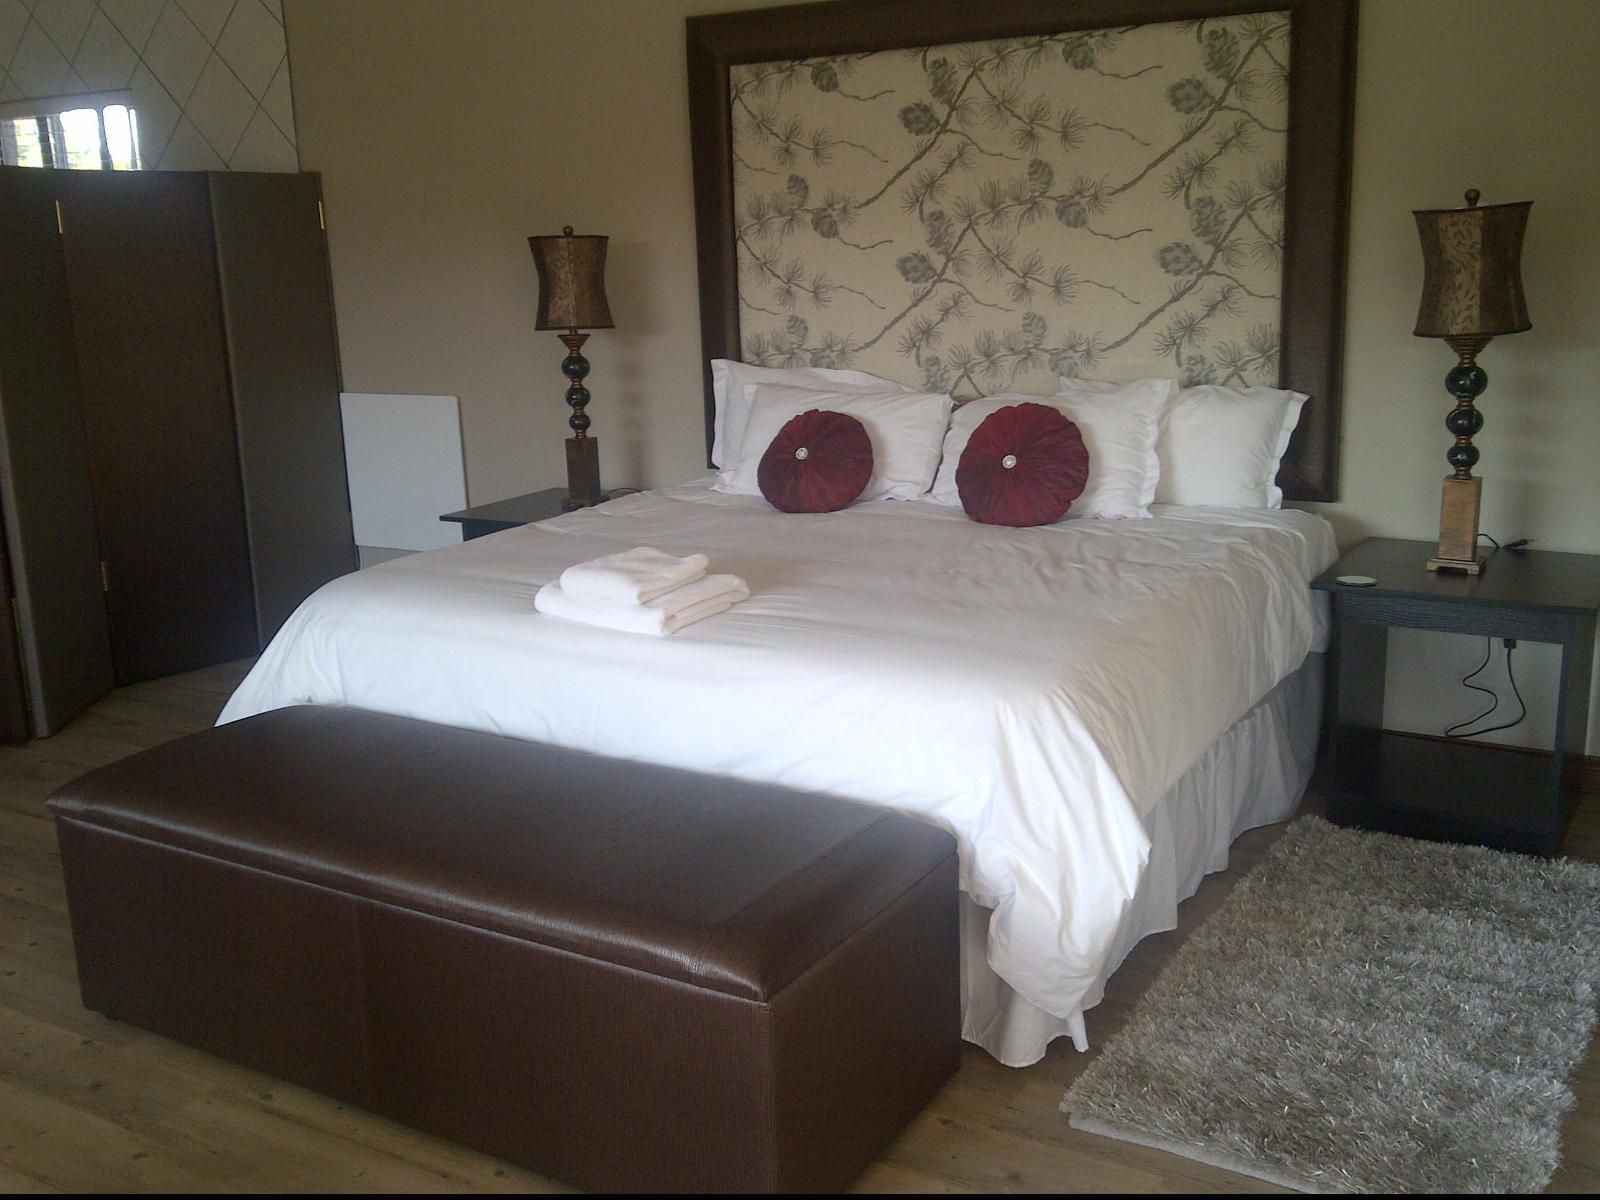 Soli Deo Gloria Boutique Hotel North Riding Johannesburg Gauteng South Africa Bedroom